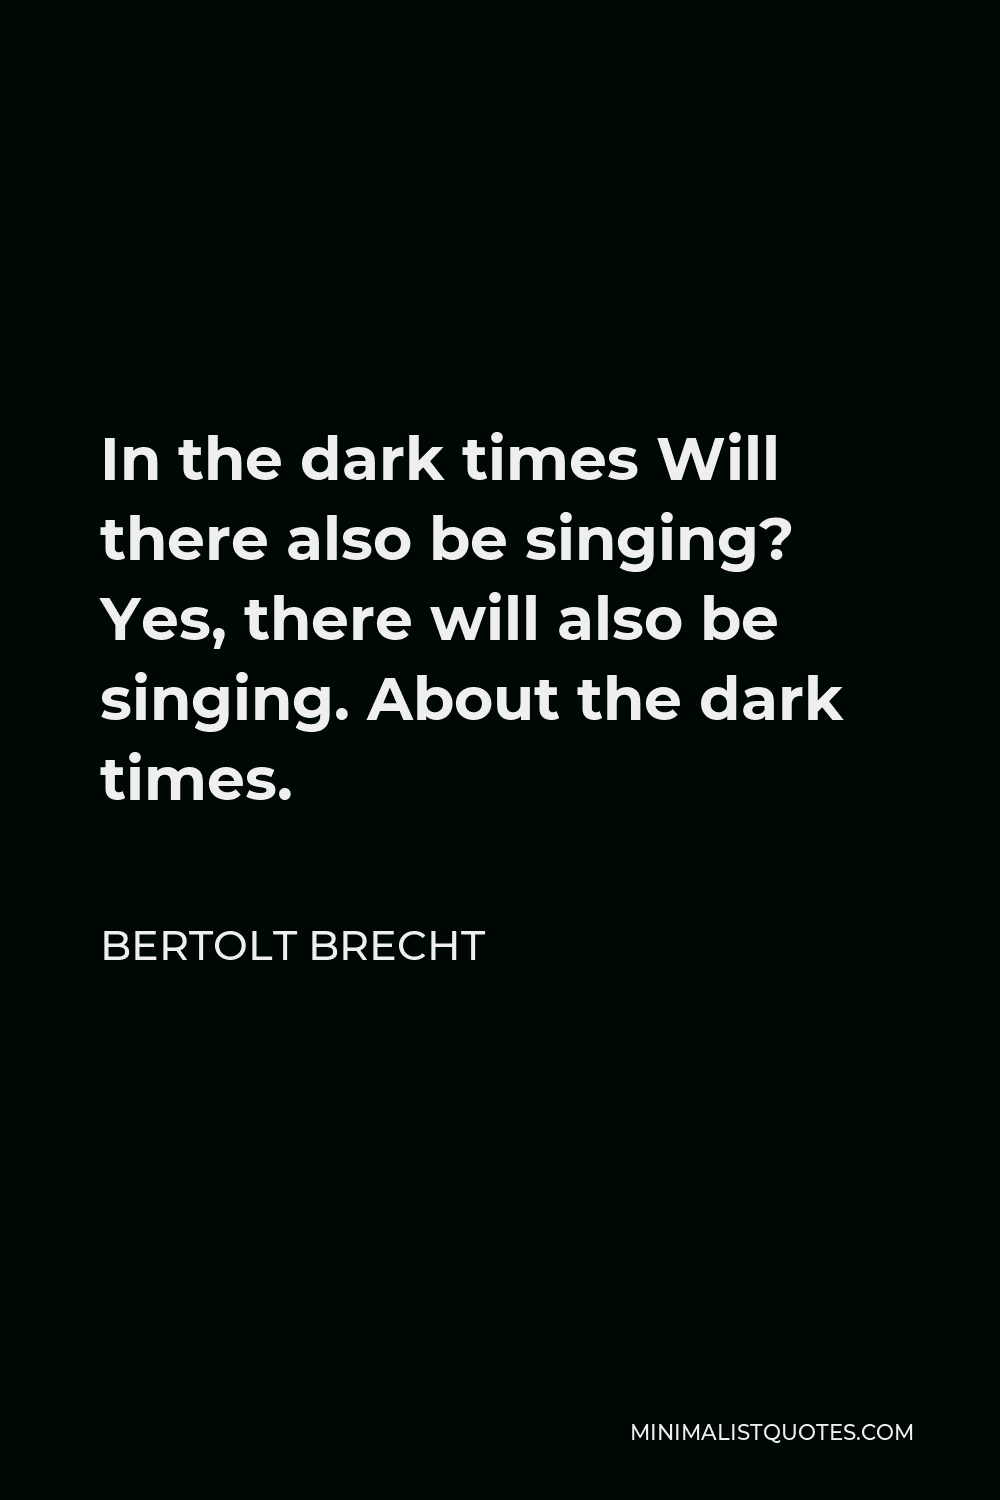 Bertolt Brecht Quote - In the dark times Will there also be singing? Yes, there will also be singing. About the dark times.